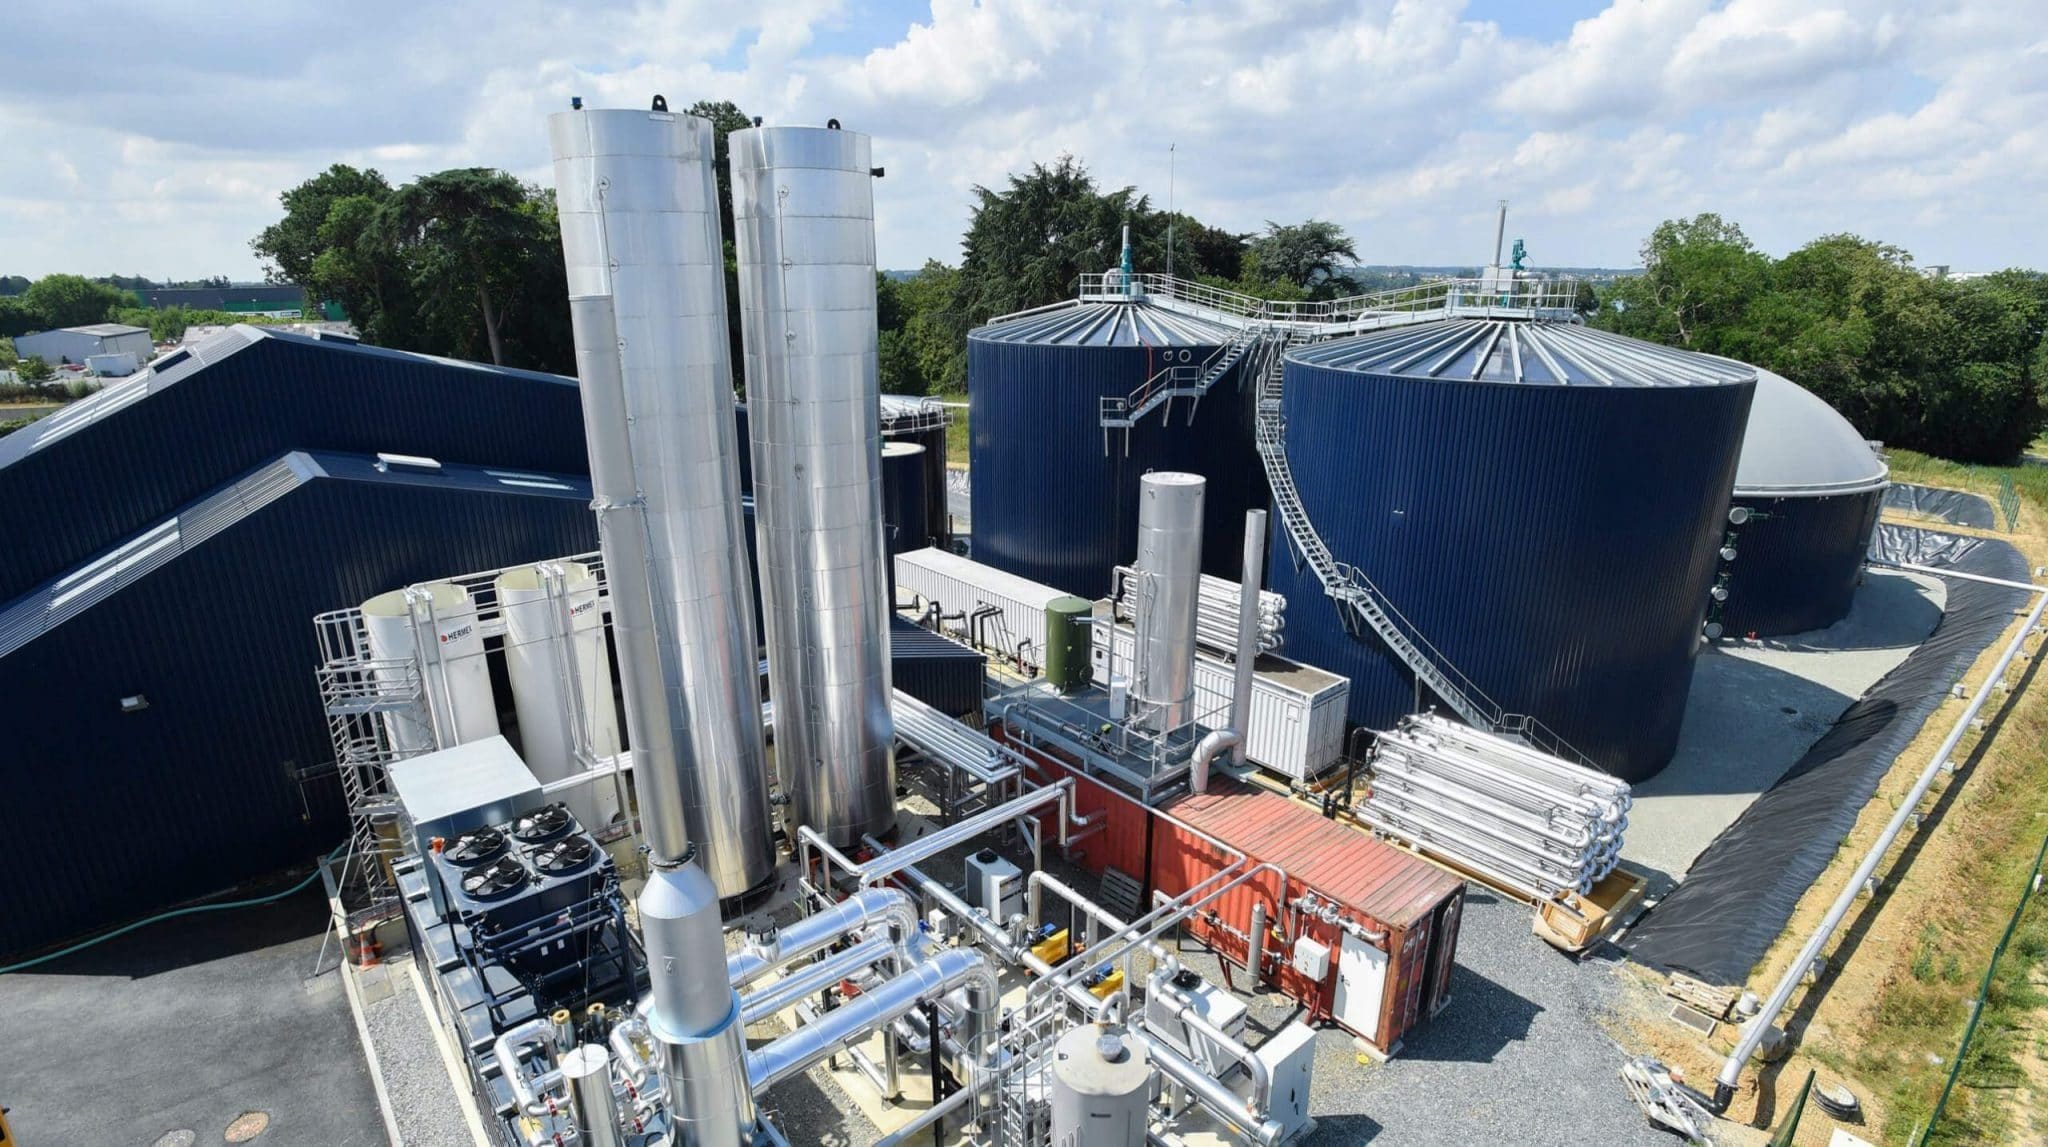 Biogas chambers next to processing unit